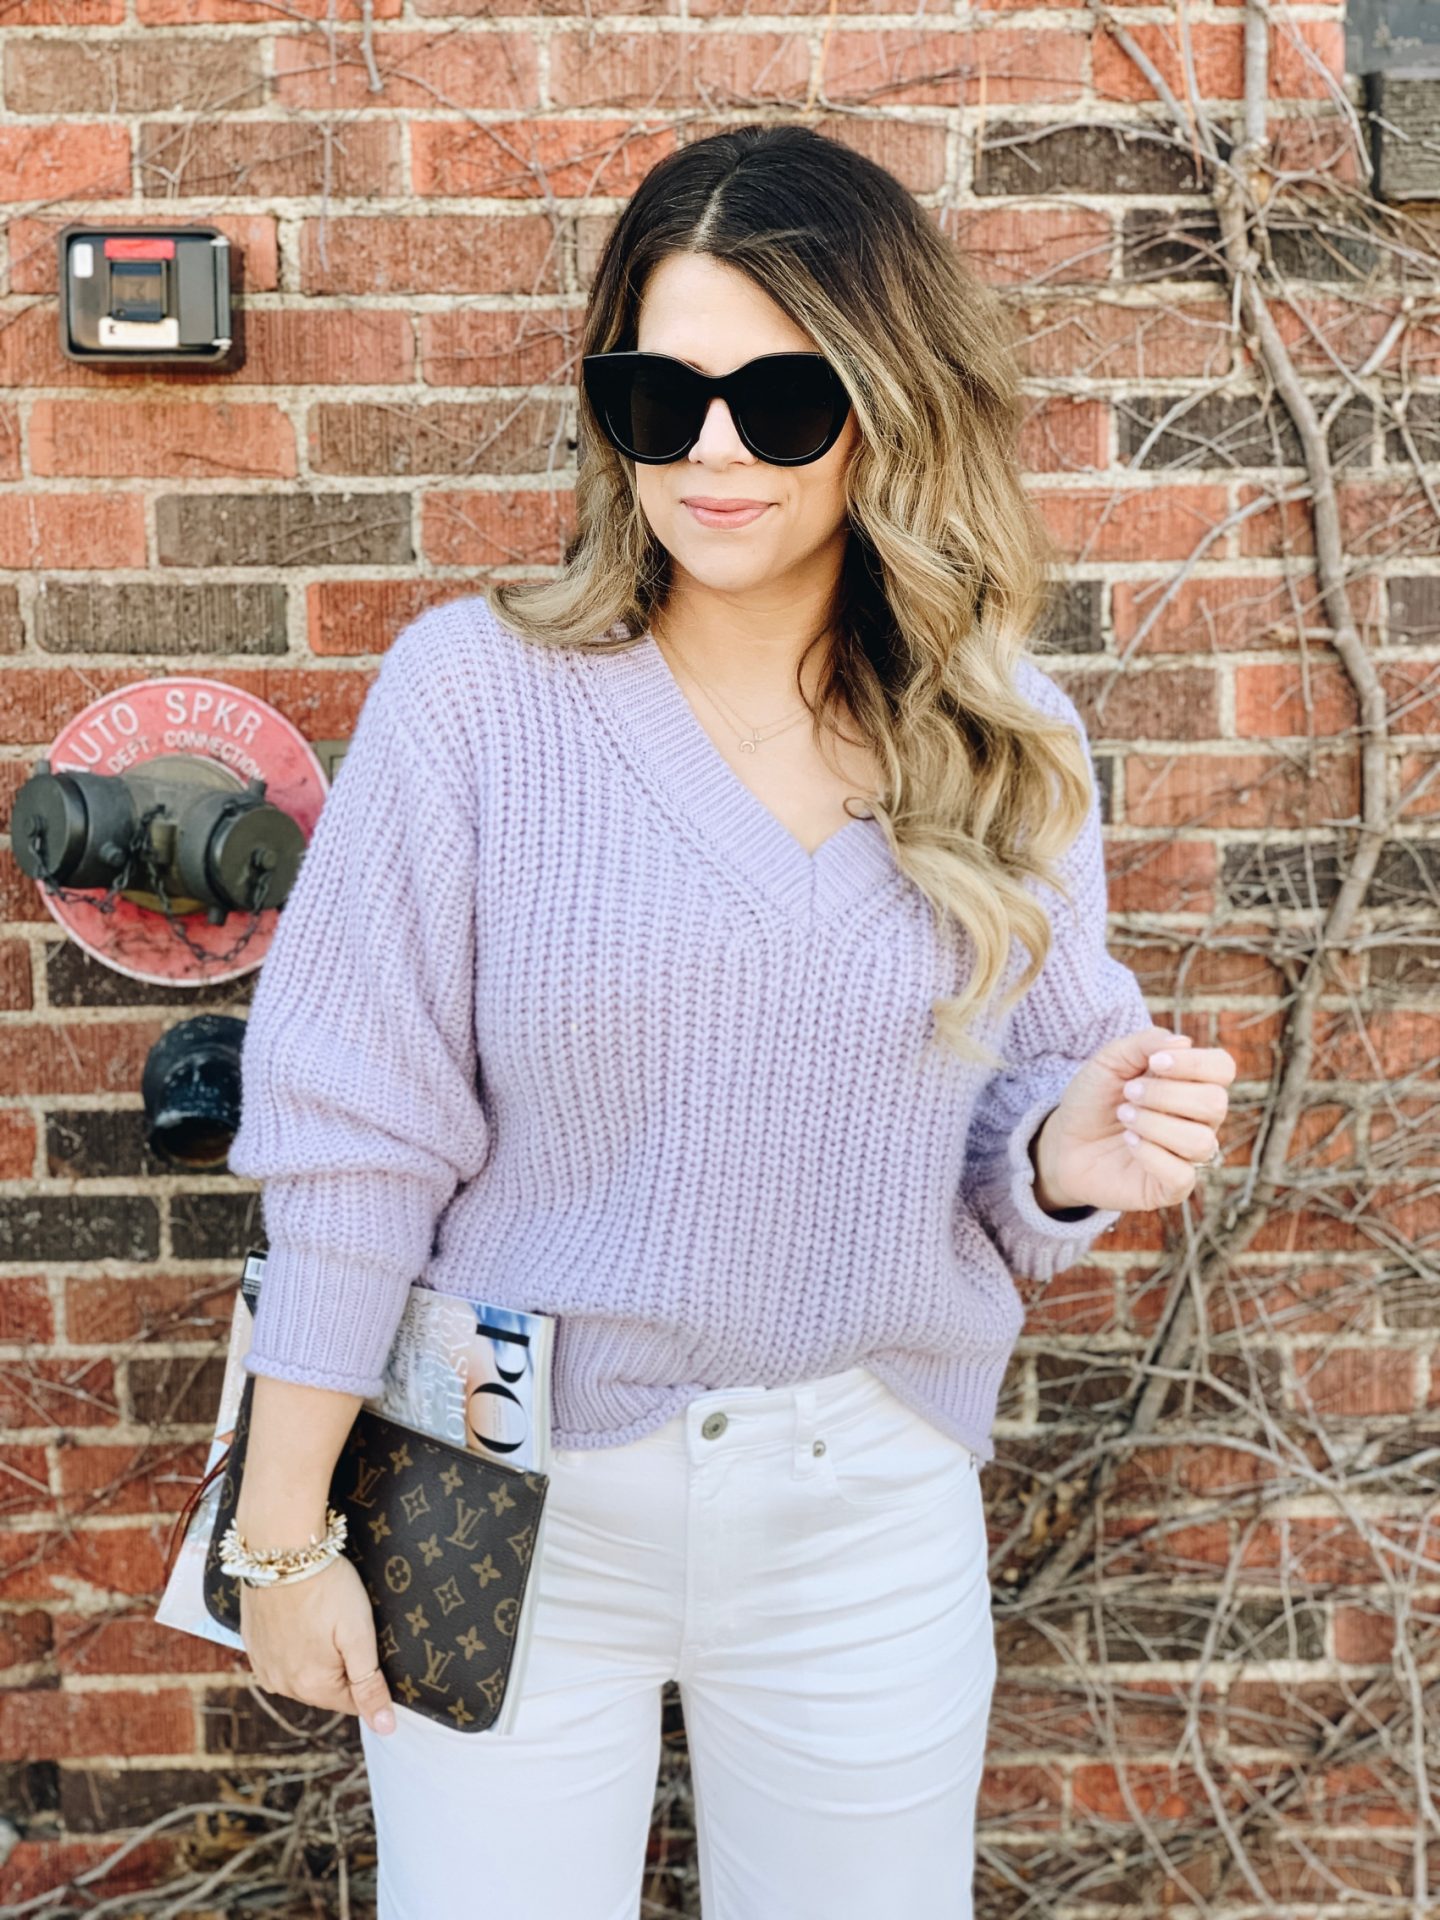 How to style white denim for Winter, Winter Style, White Jeans, Le Specs Air Heart, Neverfull GM, Lavender Sweater 